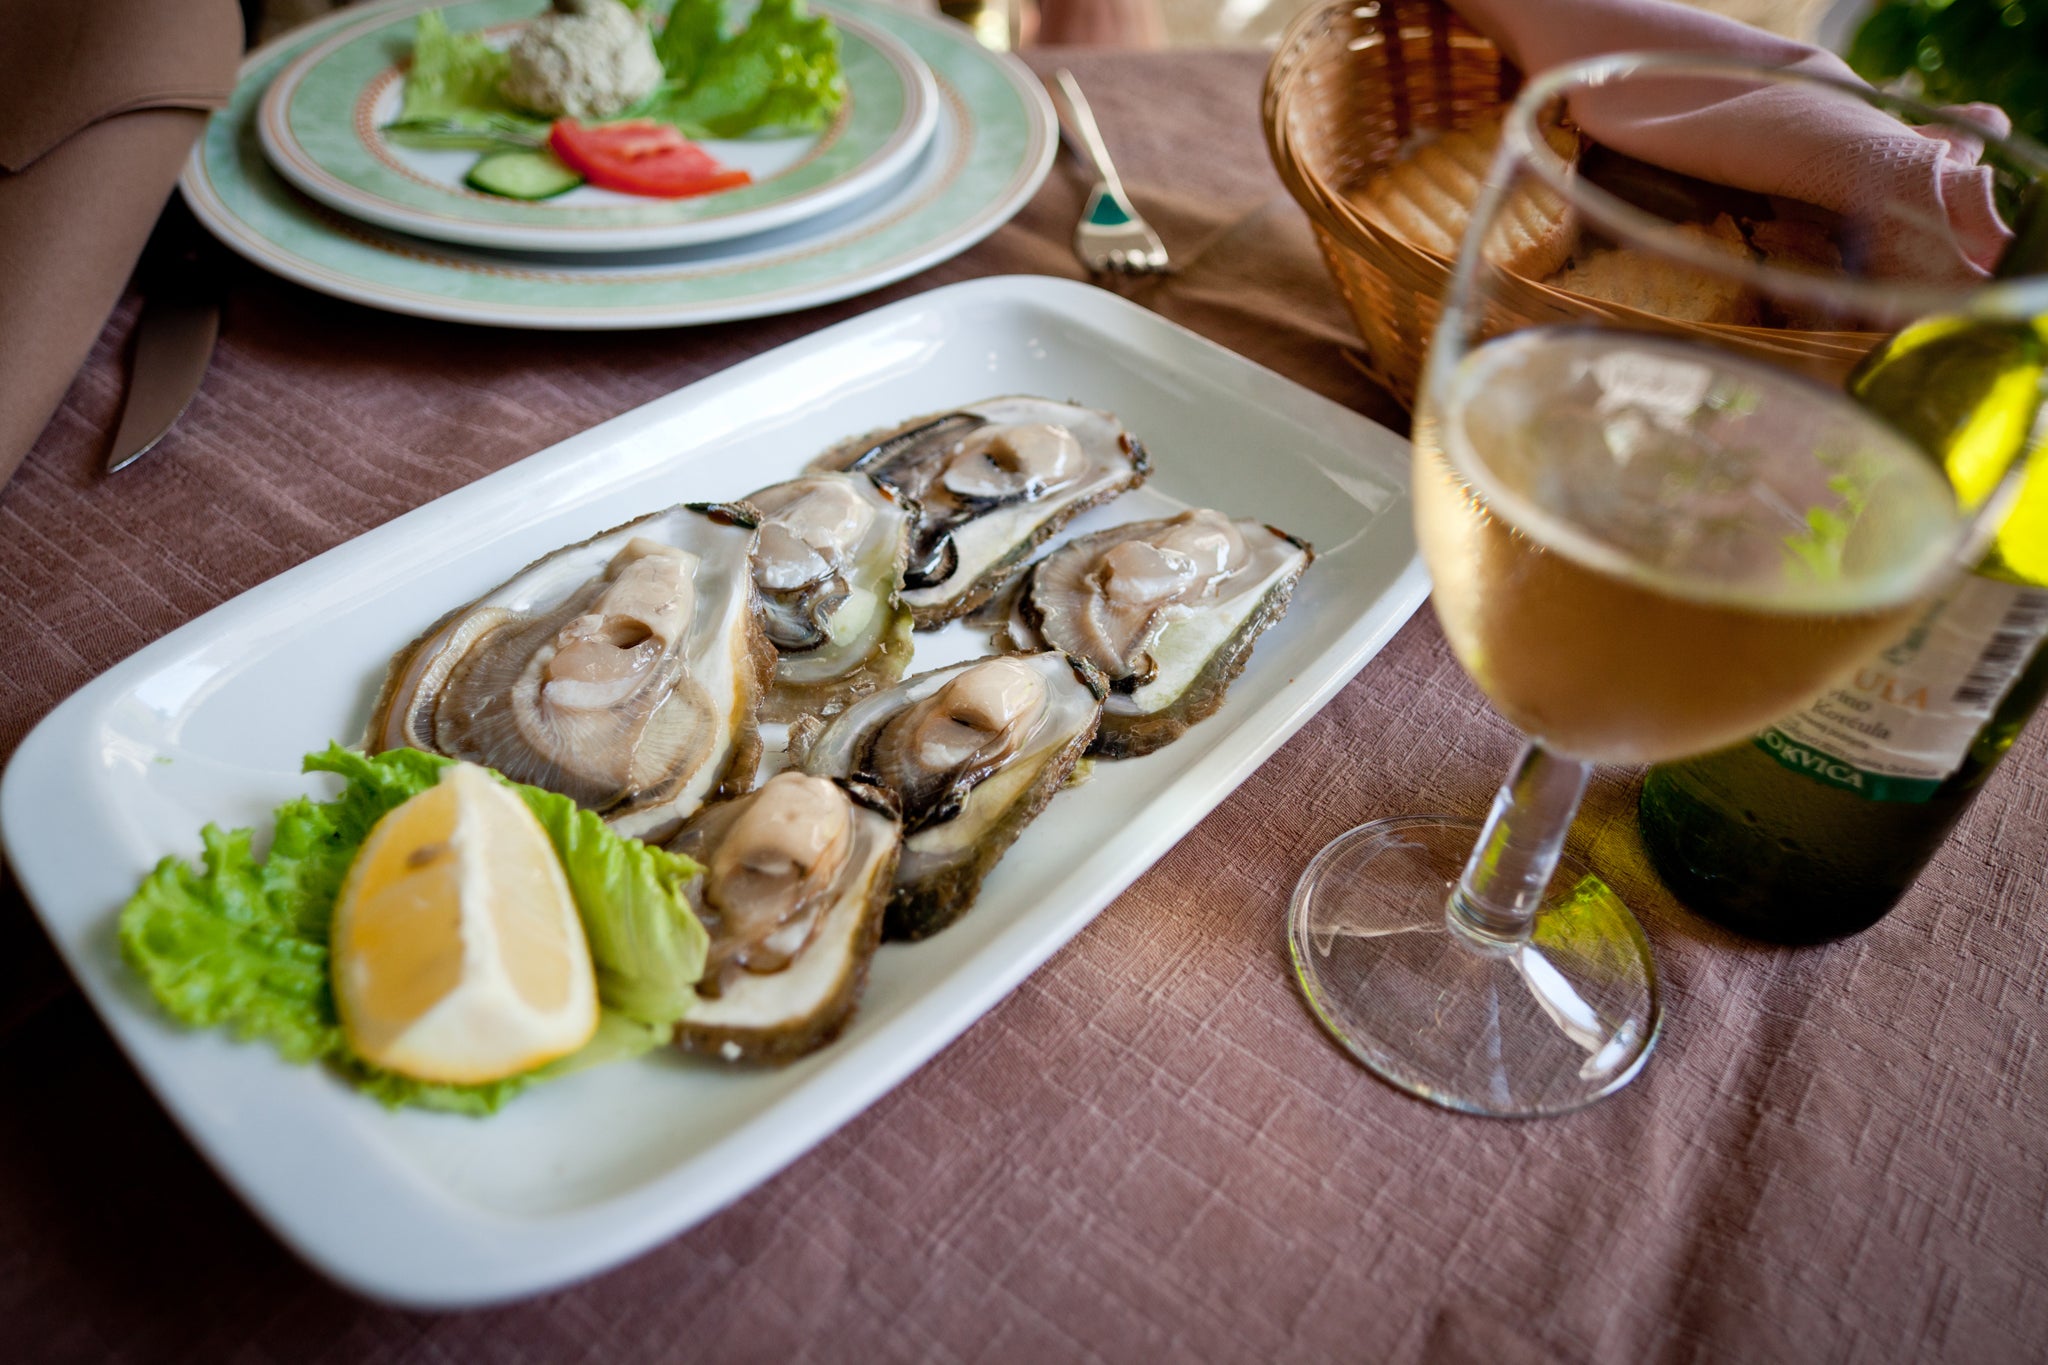 Croatian oysters and wine